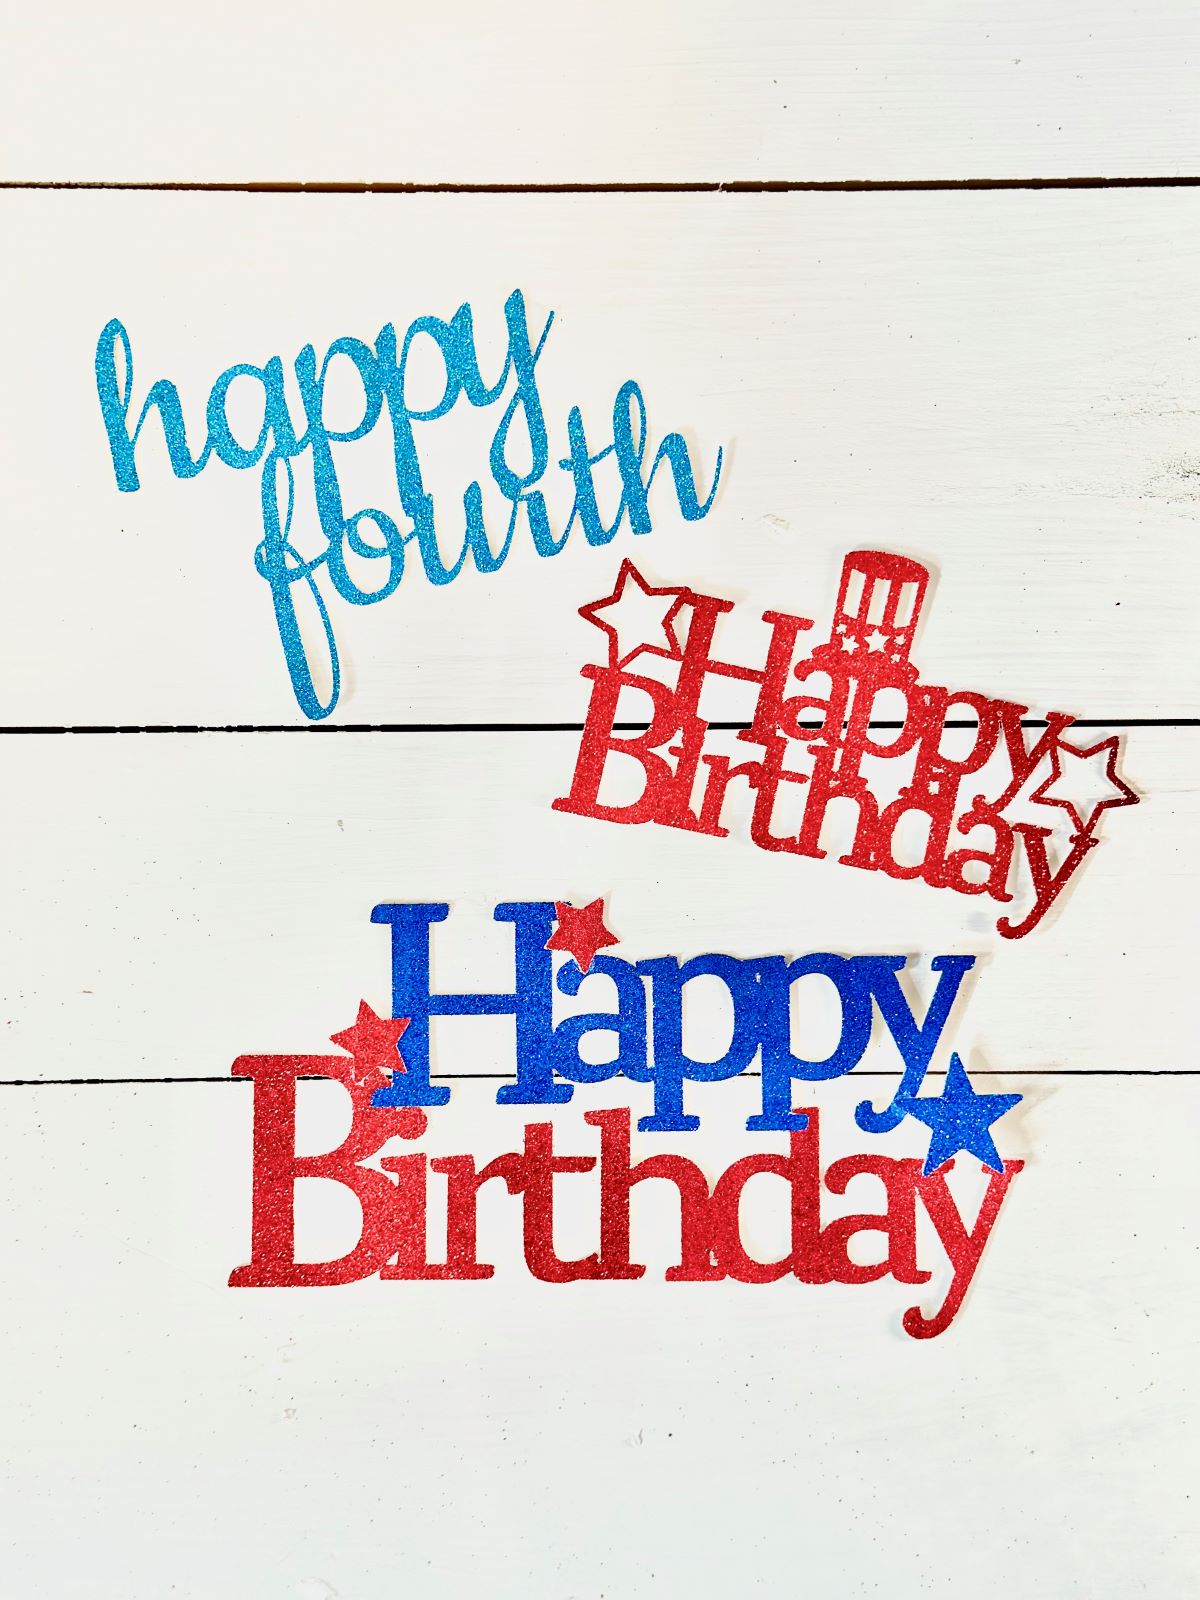 A "happy fourth" and two "happy birthday" fourth of july cake toppers.